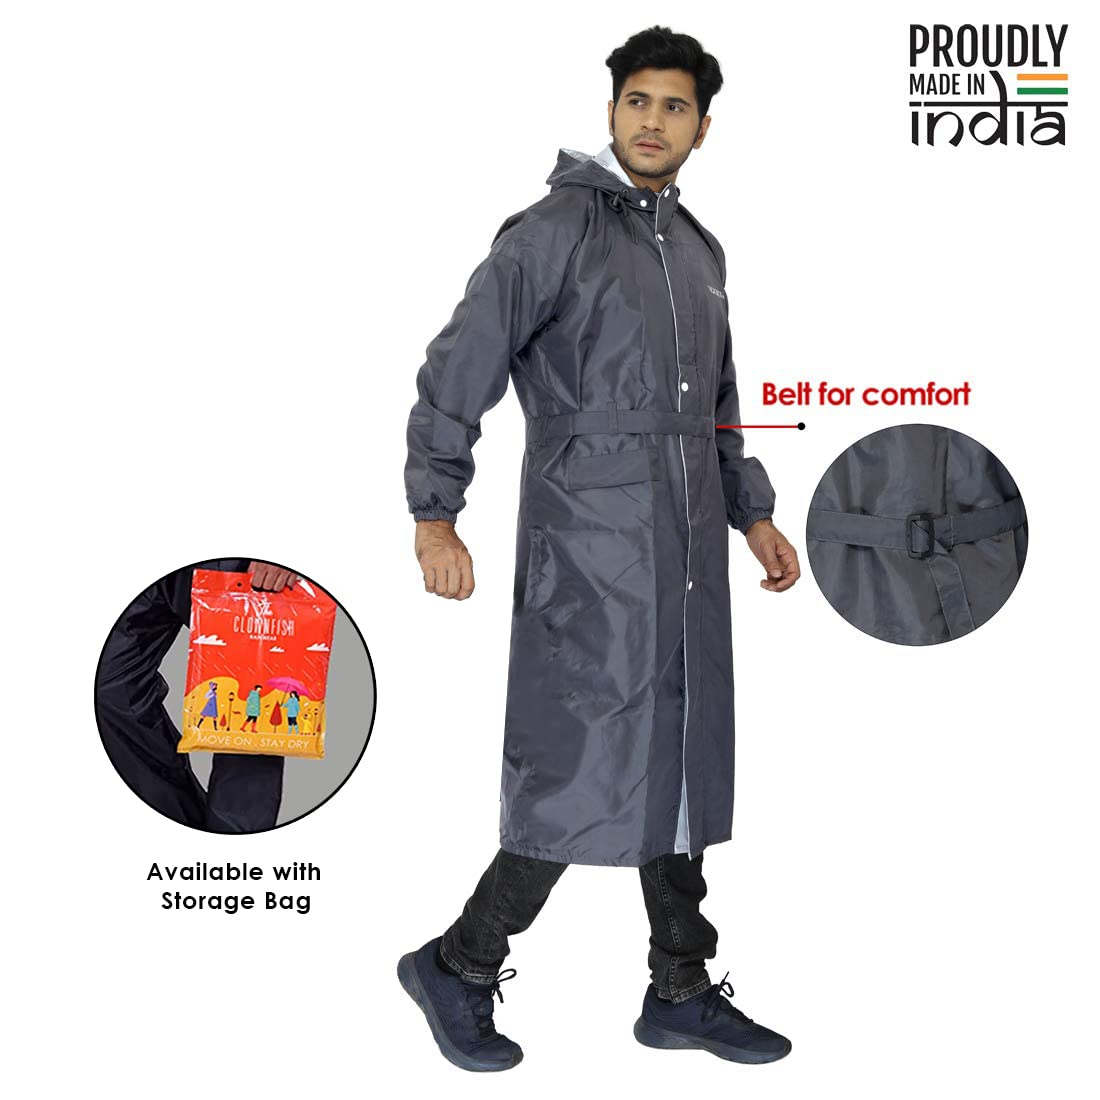 THE CLOWNFISH Polyester Reversible Use Unisex Waterproof Long Coat Standard Length Raincoat For Men&Women With Adjustable Hood And Reflector At Back For Night Visibility Opener Series(Grey-Free Size)